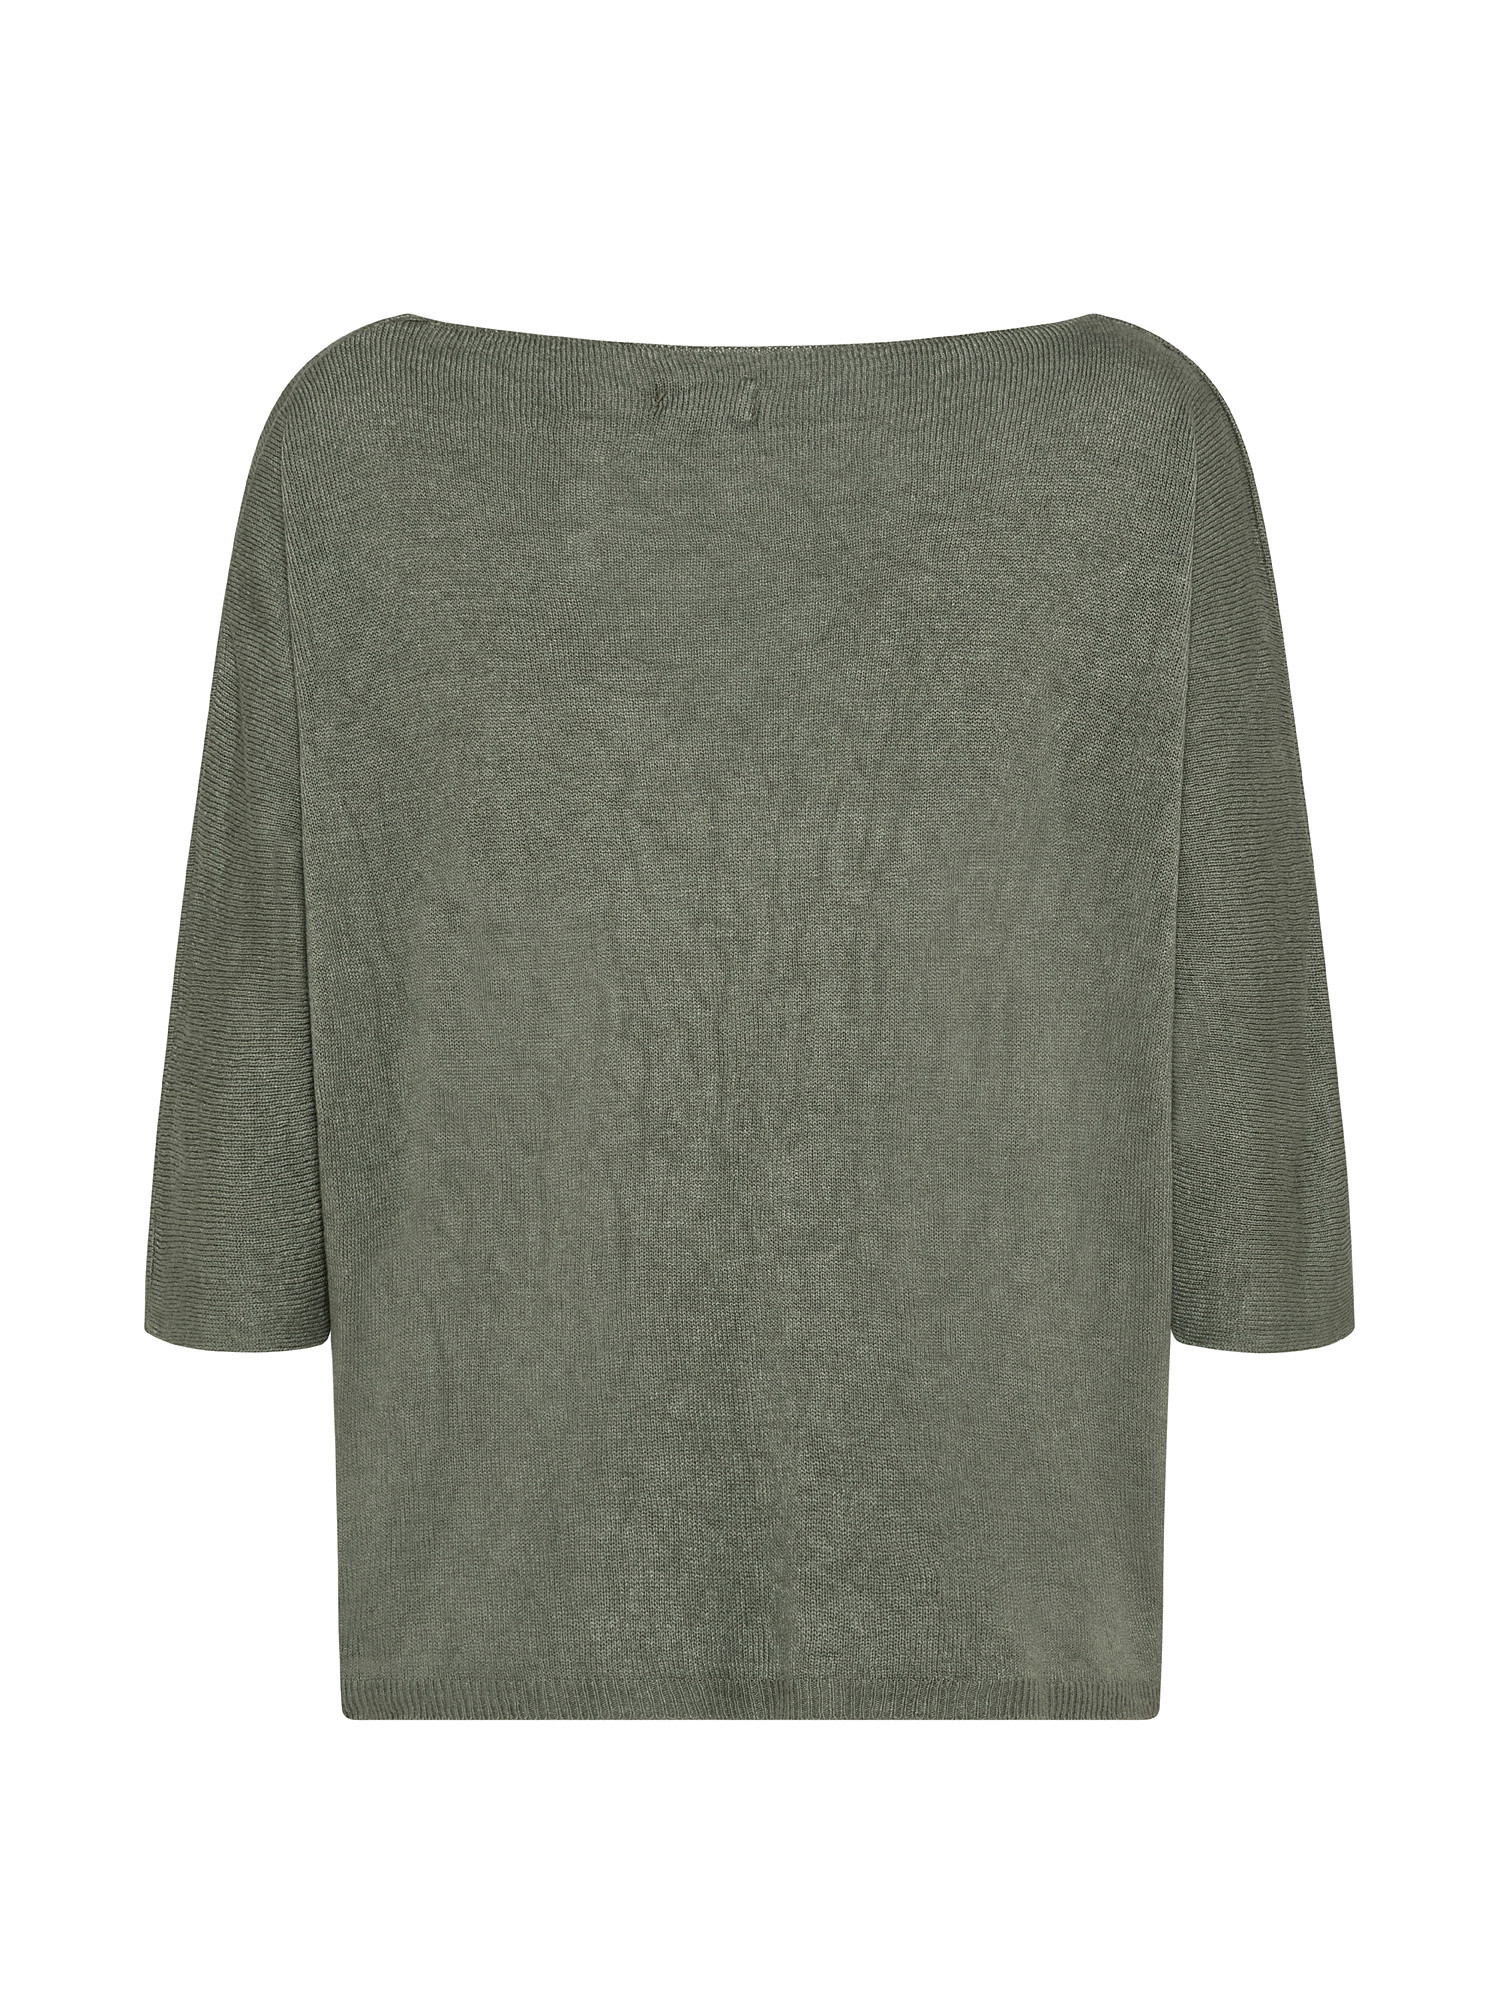 Oversized sweater with neckline, Green, large image number 1